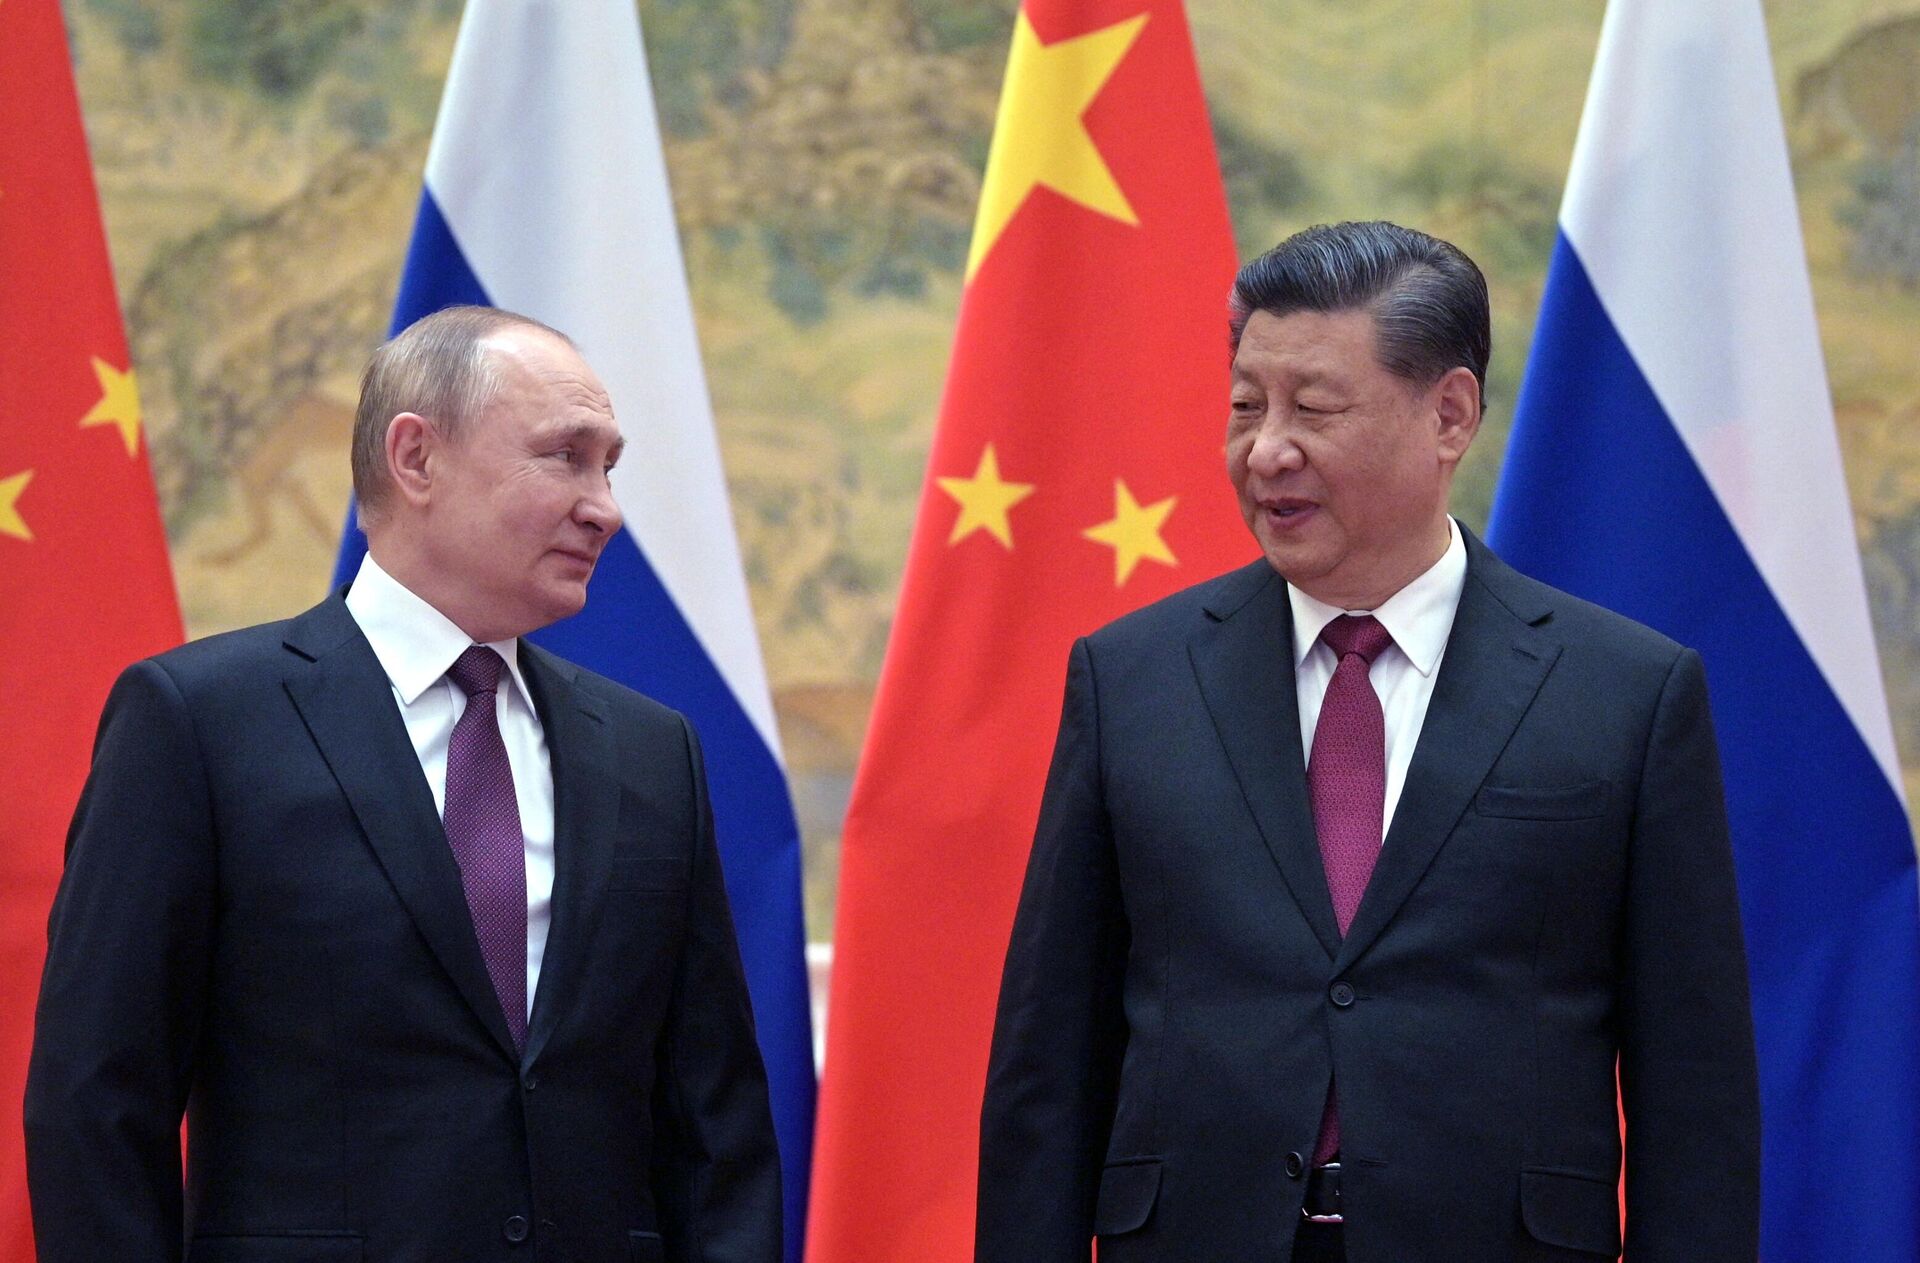 Russian President Vladimir Putin (L) and Chinese President Xi Jinping pose for a photograph during their meeting in Beijing, on February 4, 2022. - Sputnik International, 1920, 29.10.2022